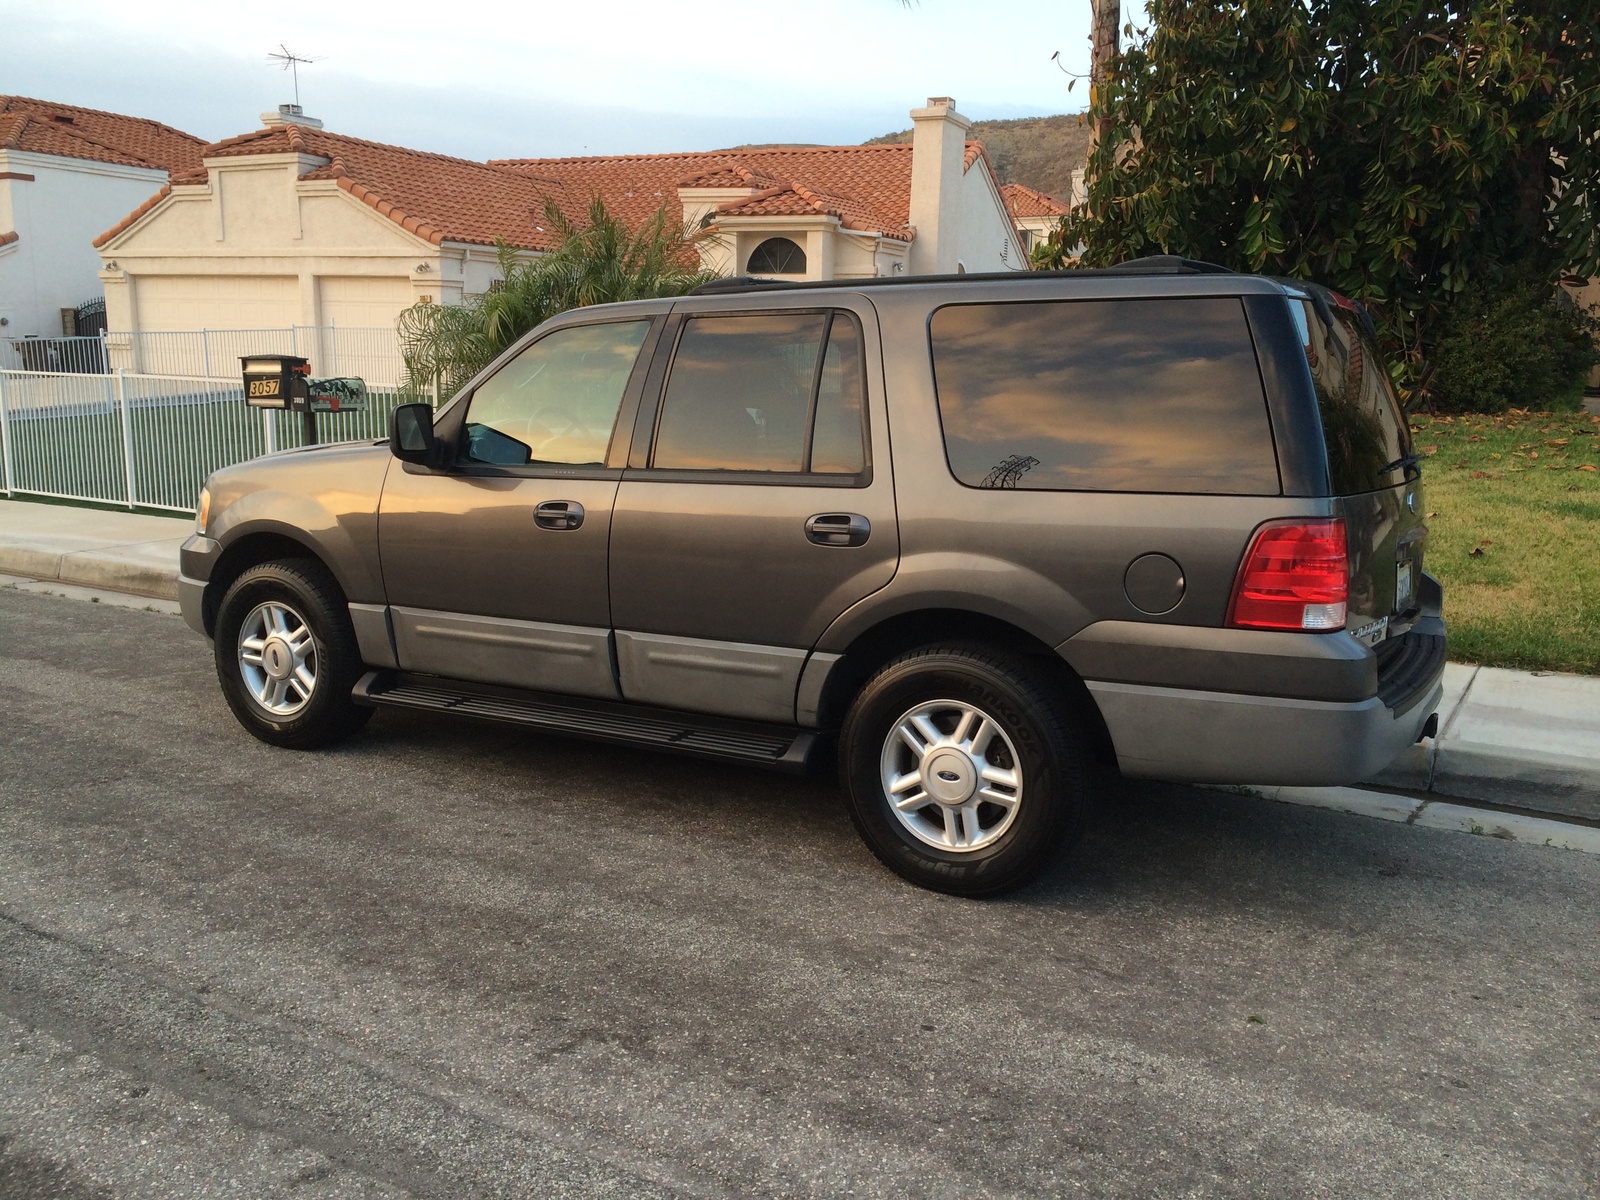 2004 Ford expedition xls review #7